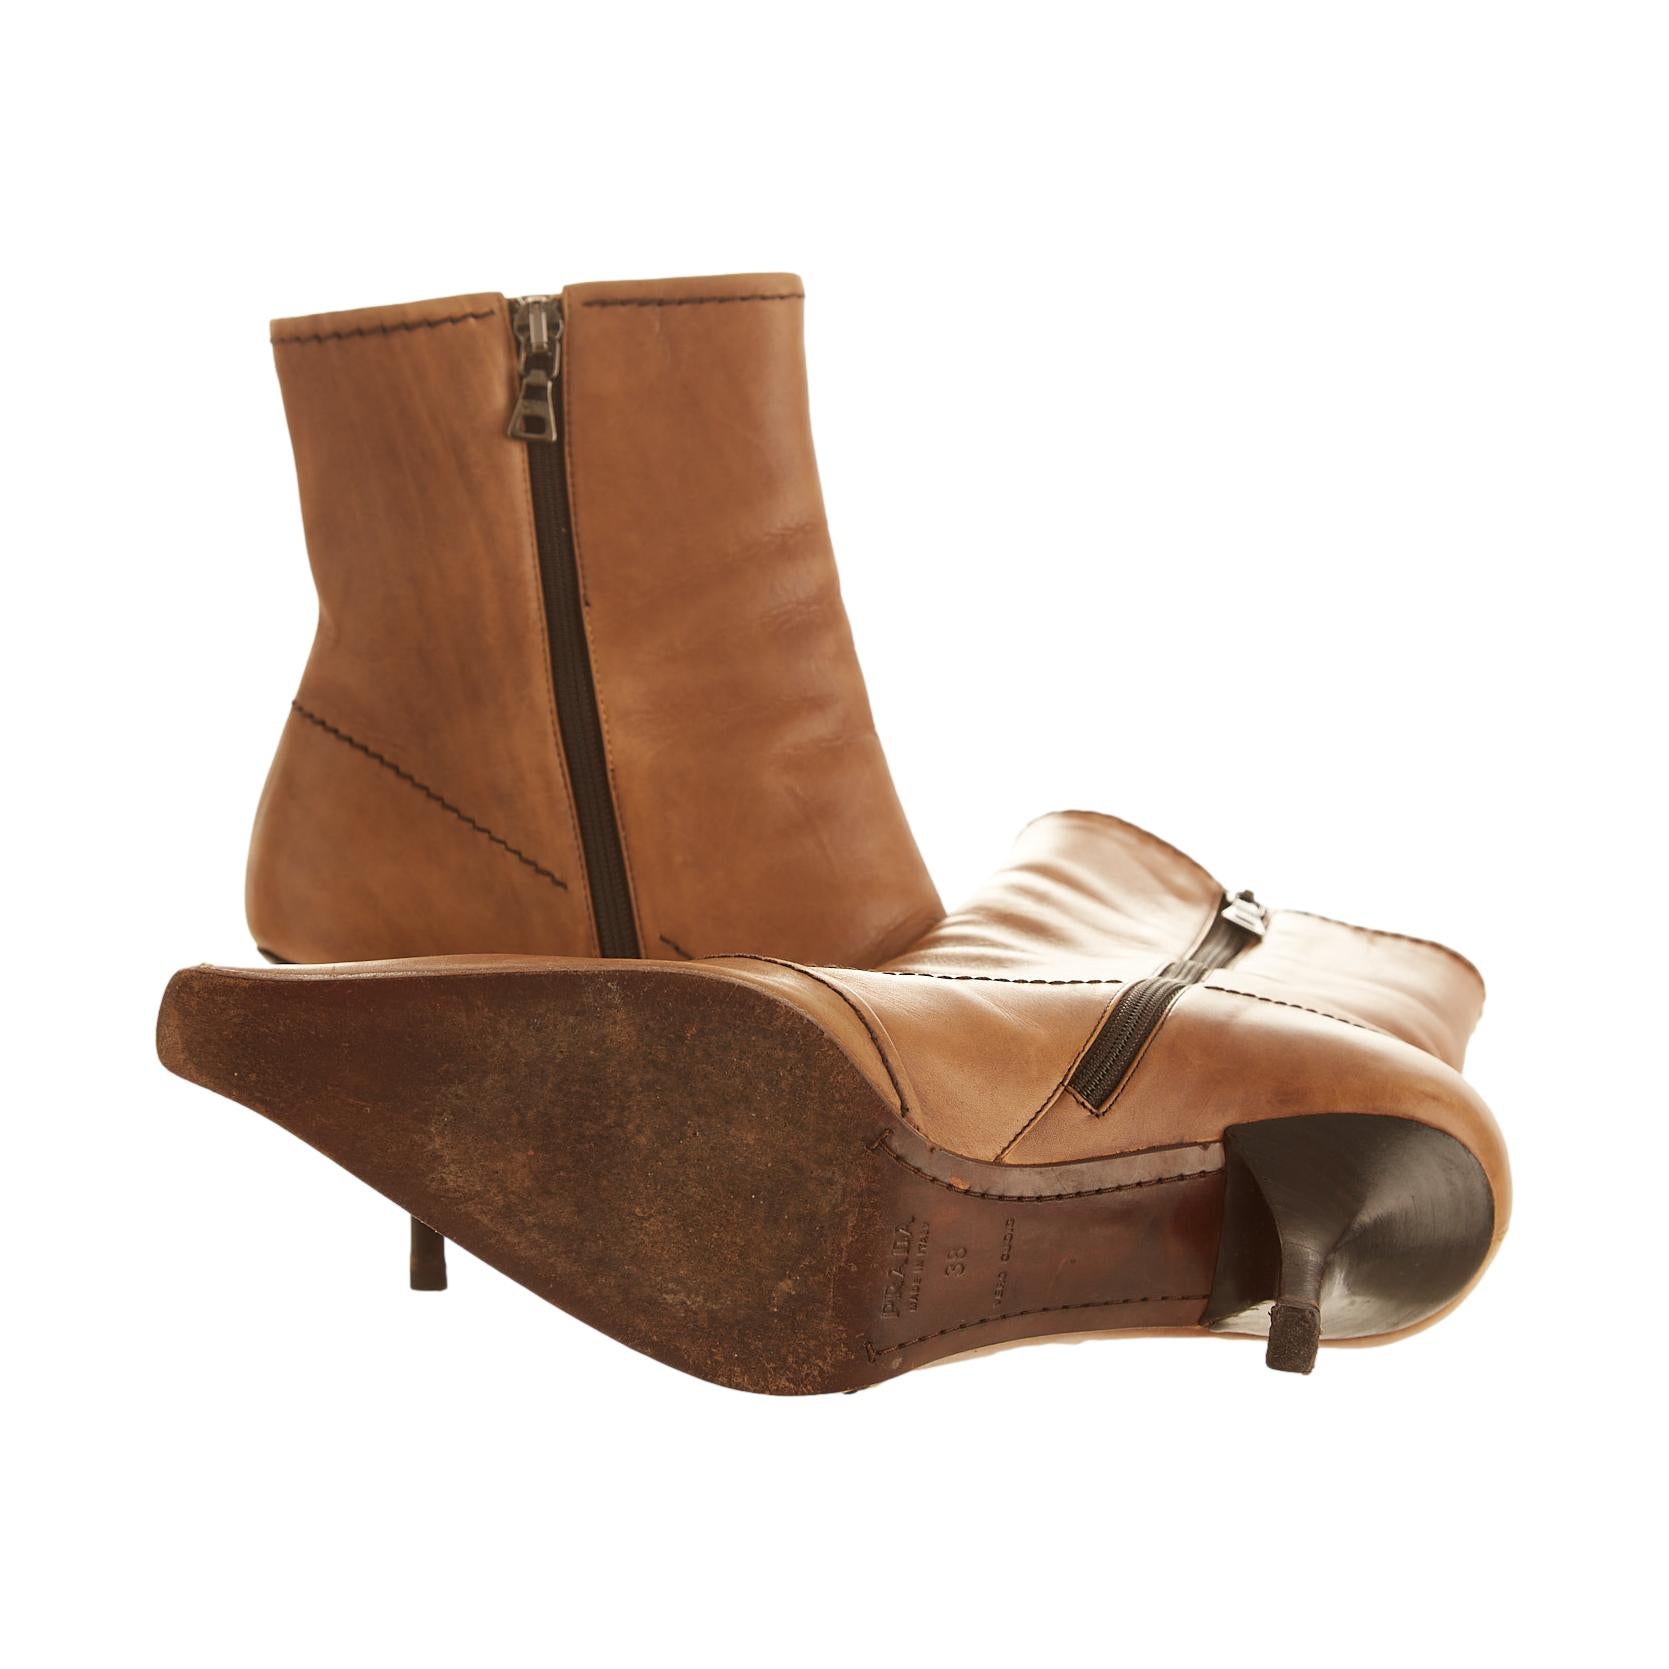 Prada Brown Leather Flower Ankle Boots